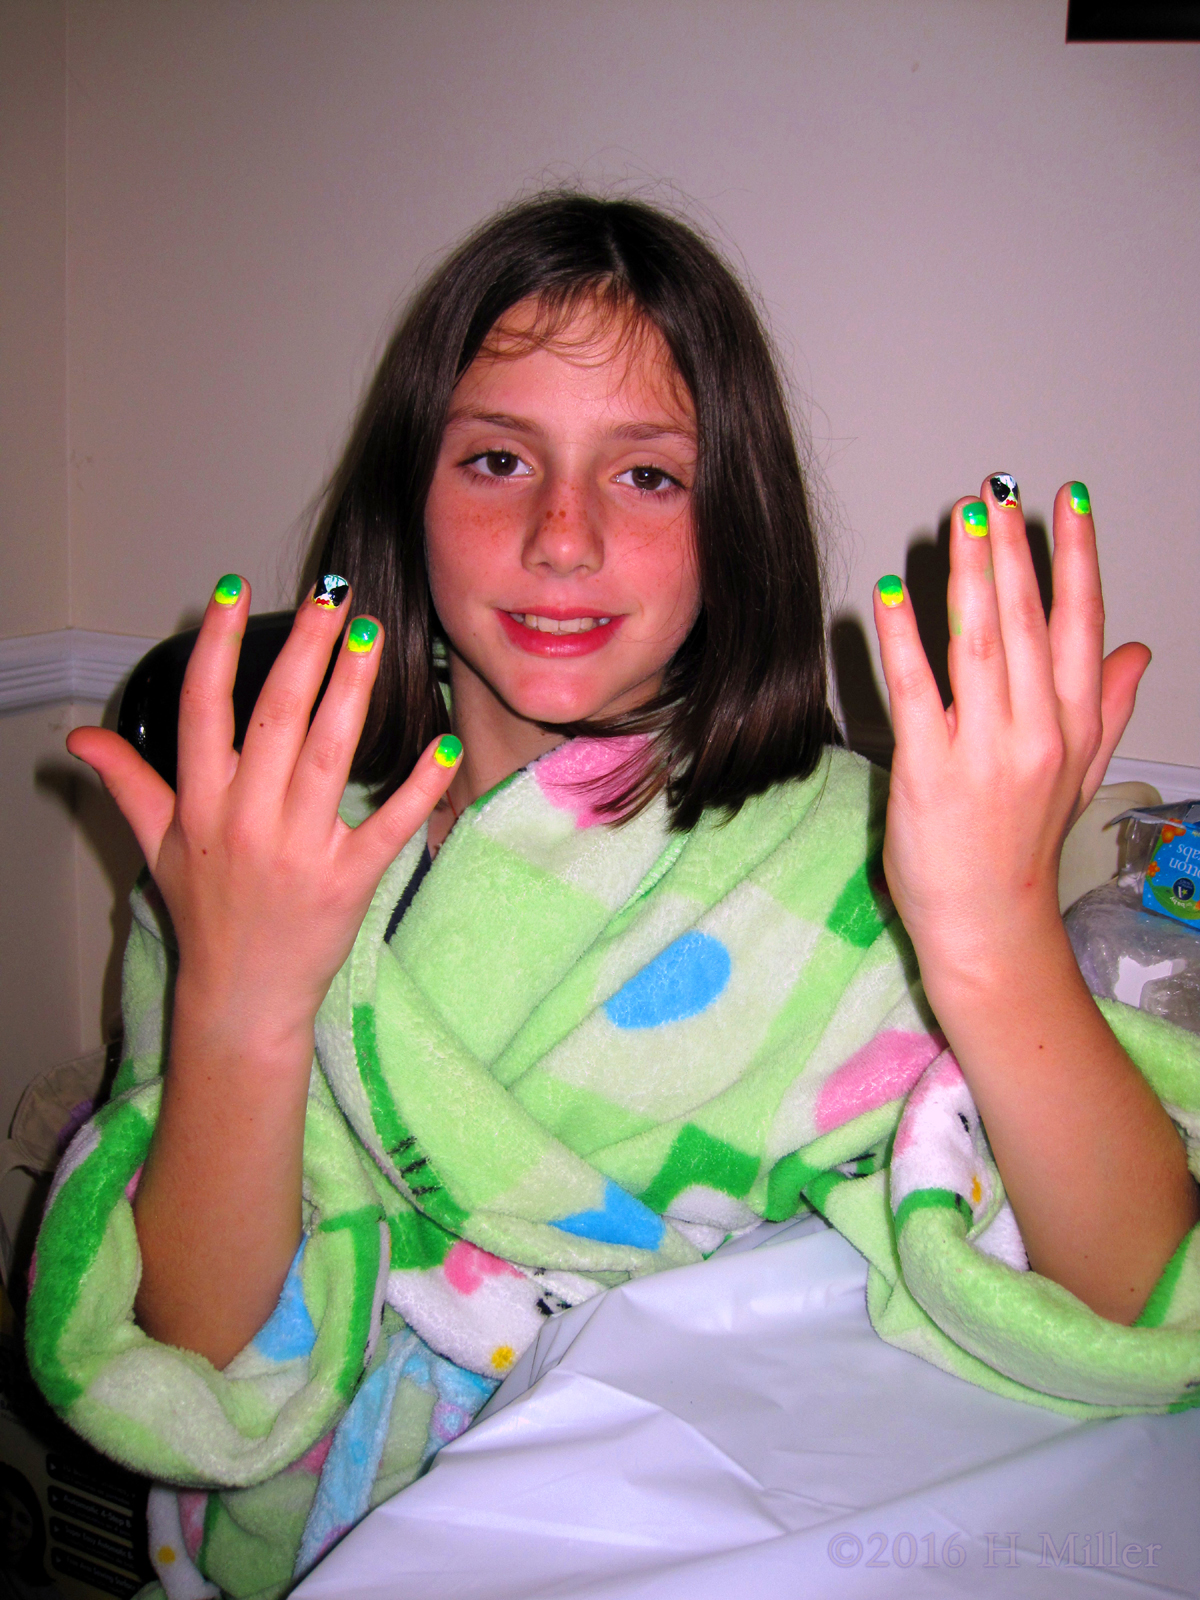 Smiling With Her New Nail Art On Her Kids Mini Mani! 